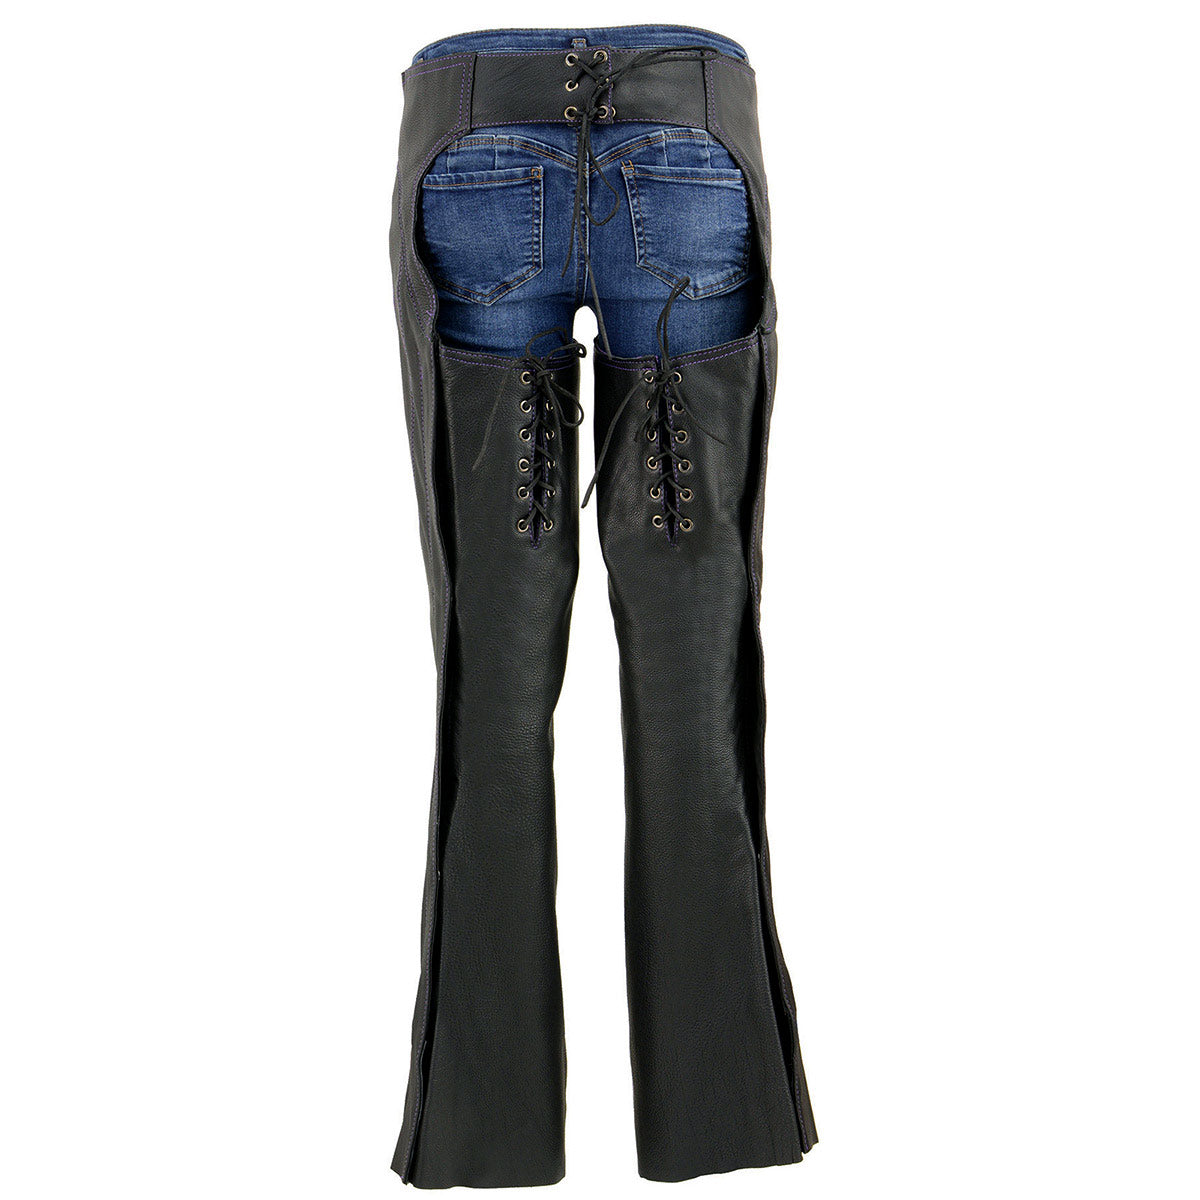 Milwaukee Leather Chaps for Women Black and Purple Low-Rise Waist- Double Buckle Reflective Embroidery Motorcycle Chap- ML1187